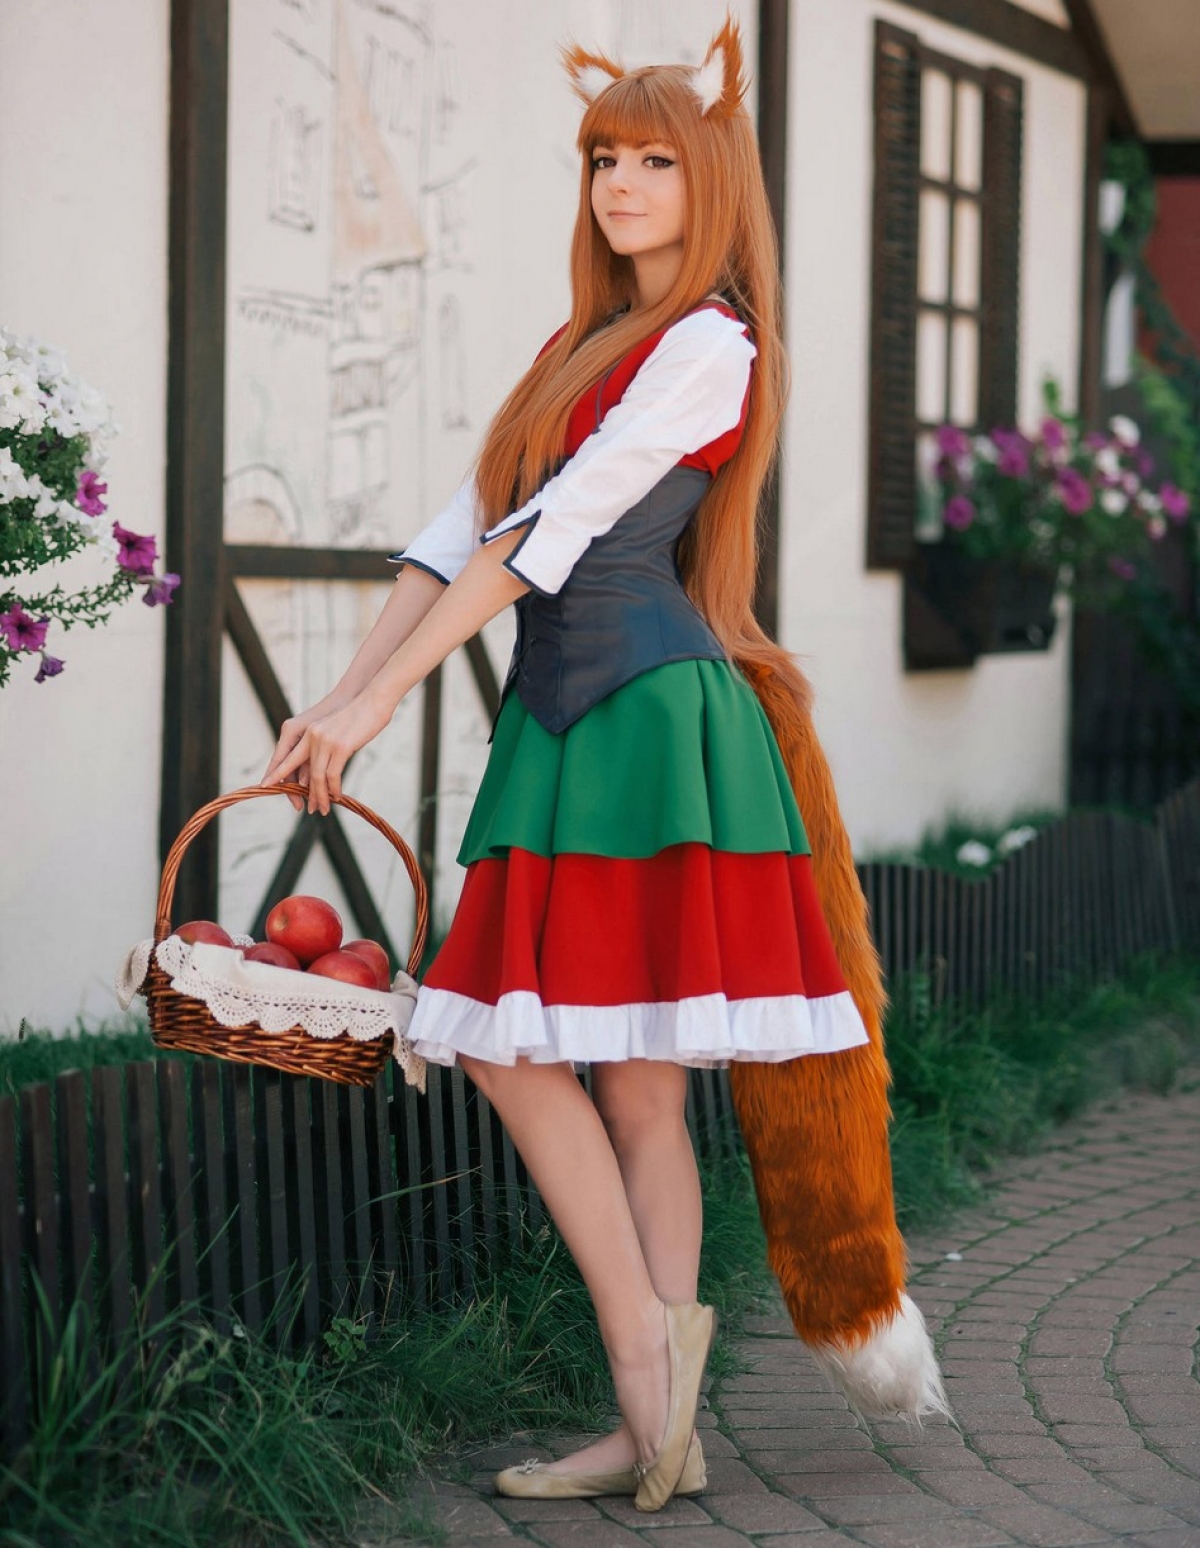 People 1200x1548 women model redhead long hair baskets tail apples women outdoors skirt portrait display house sensual gaze cosplay Holo (Spice and Wolf) wolf girls